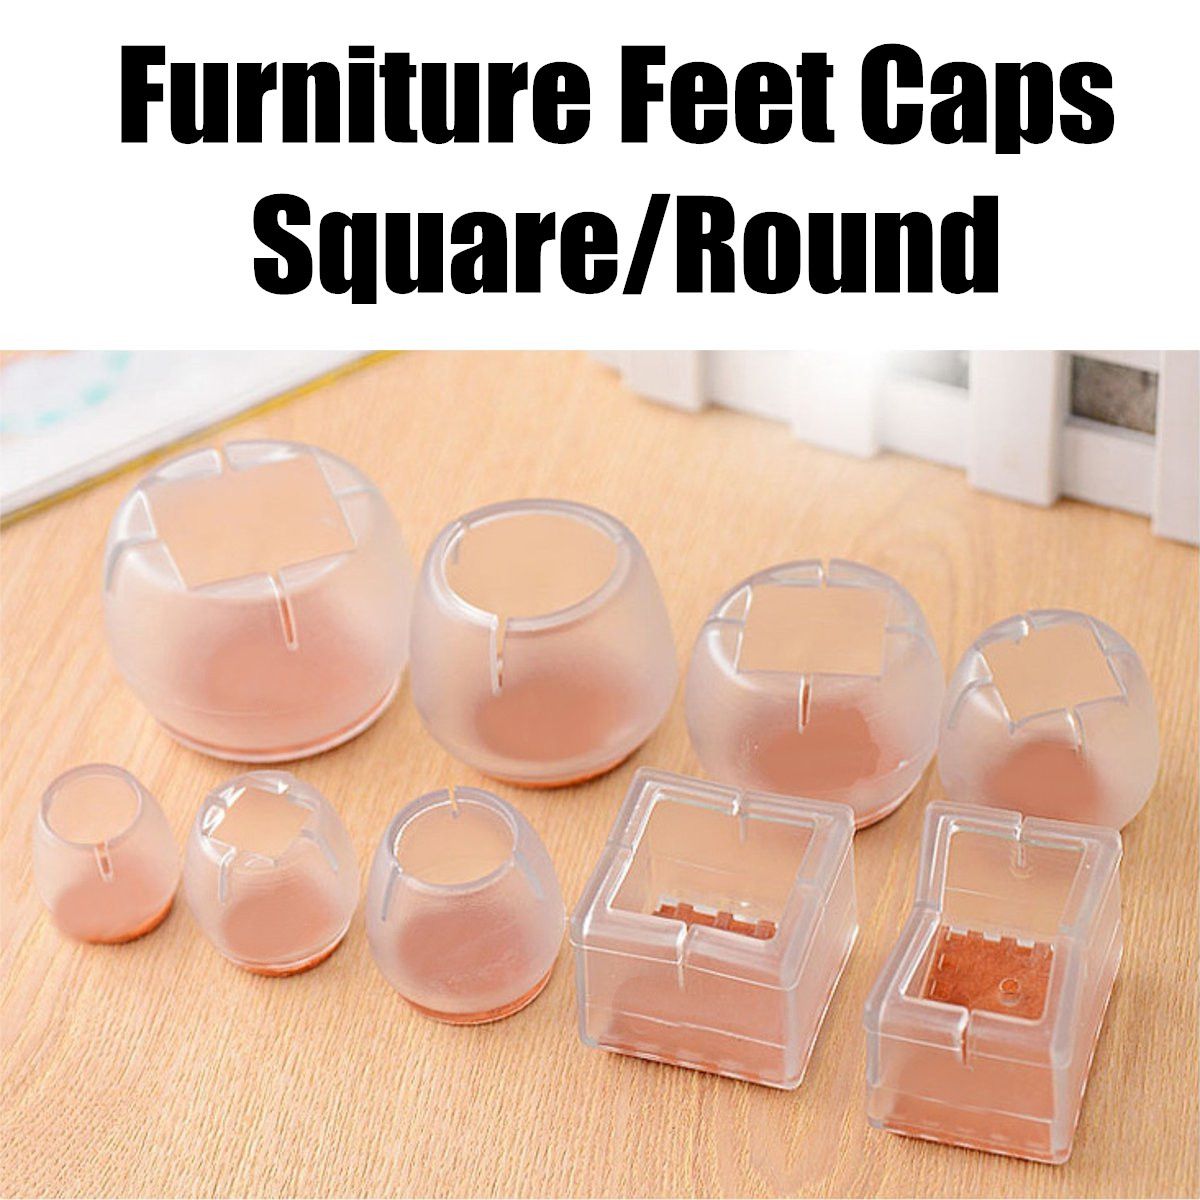 Silicone-Square-Round-Furniture-Feet-Caps-Table-Chair-Leg-Pads-Floor-Protector-Scratchproof-1320424